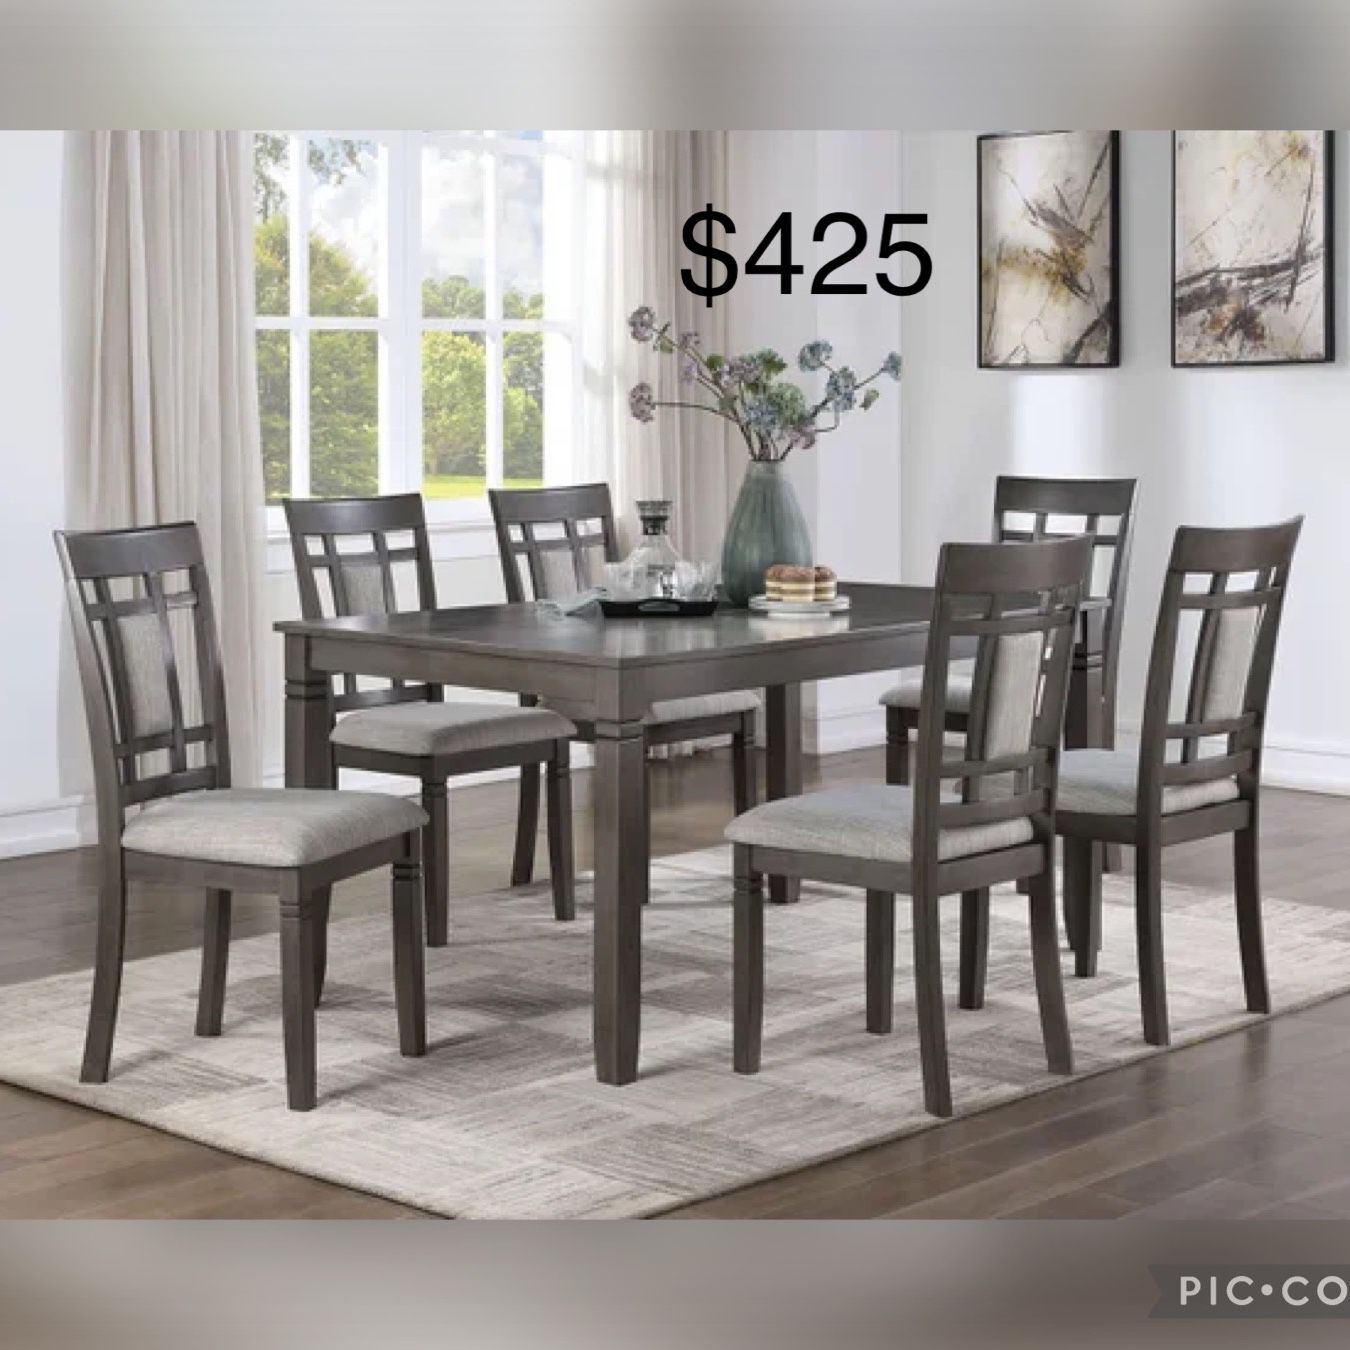 7 Pc Dining Table Set 